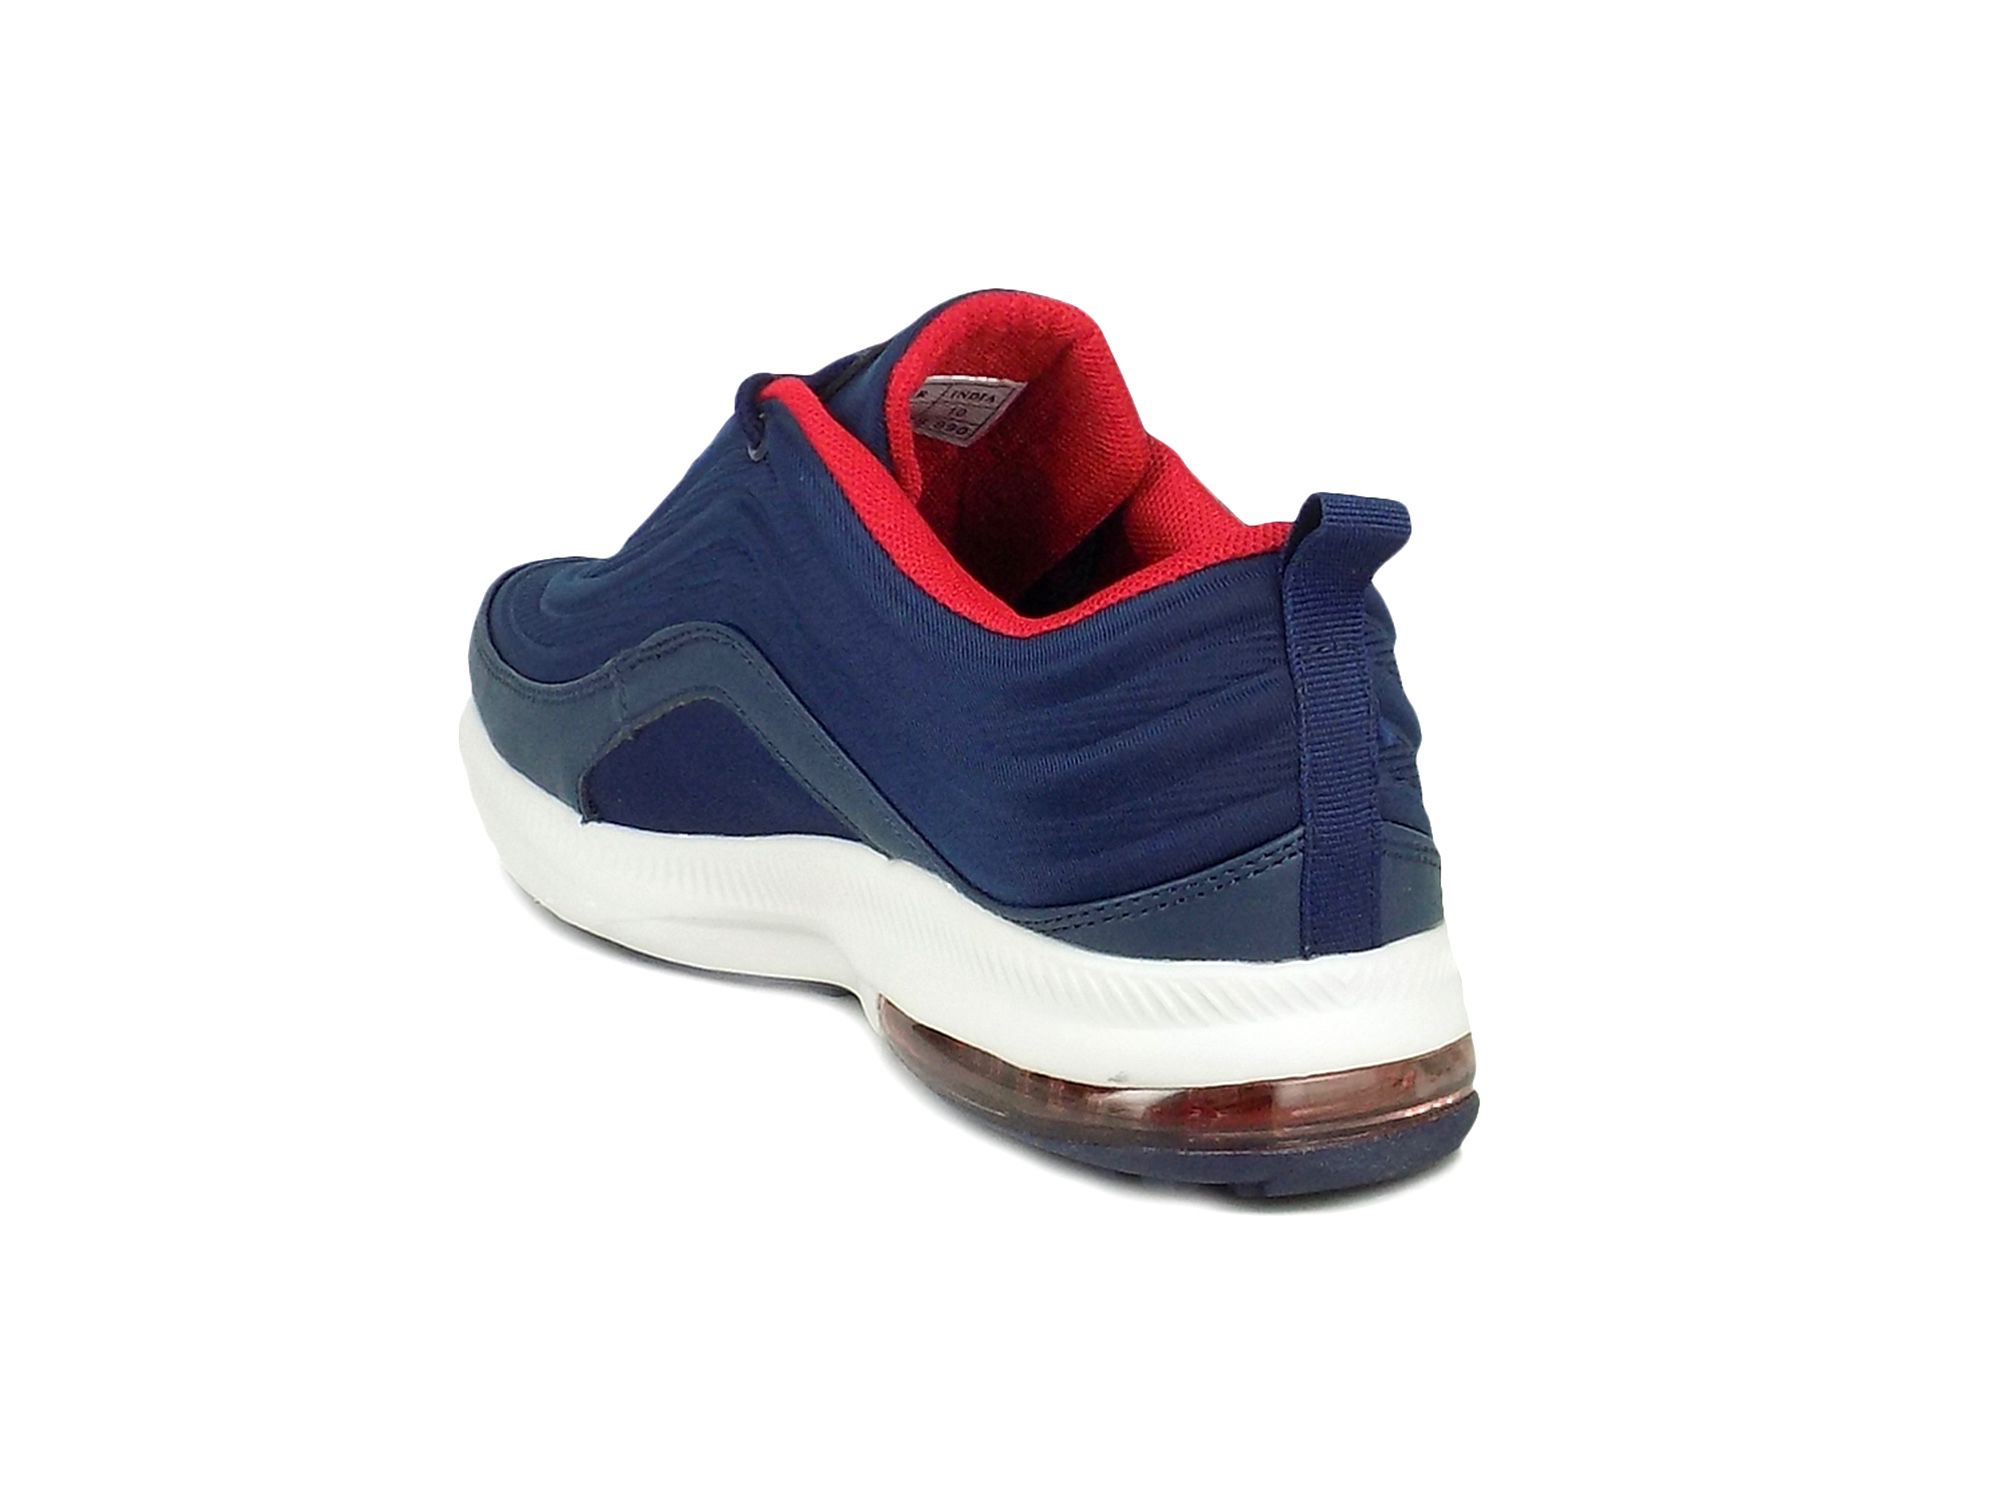 oxypair shoes red